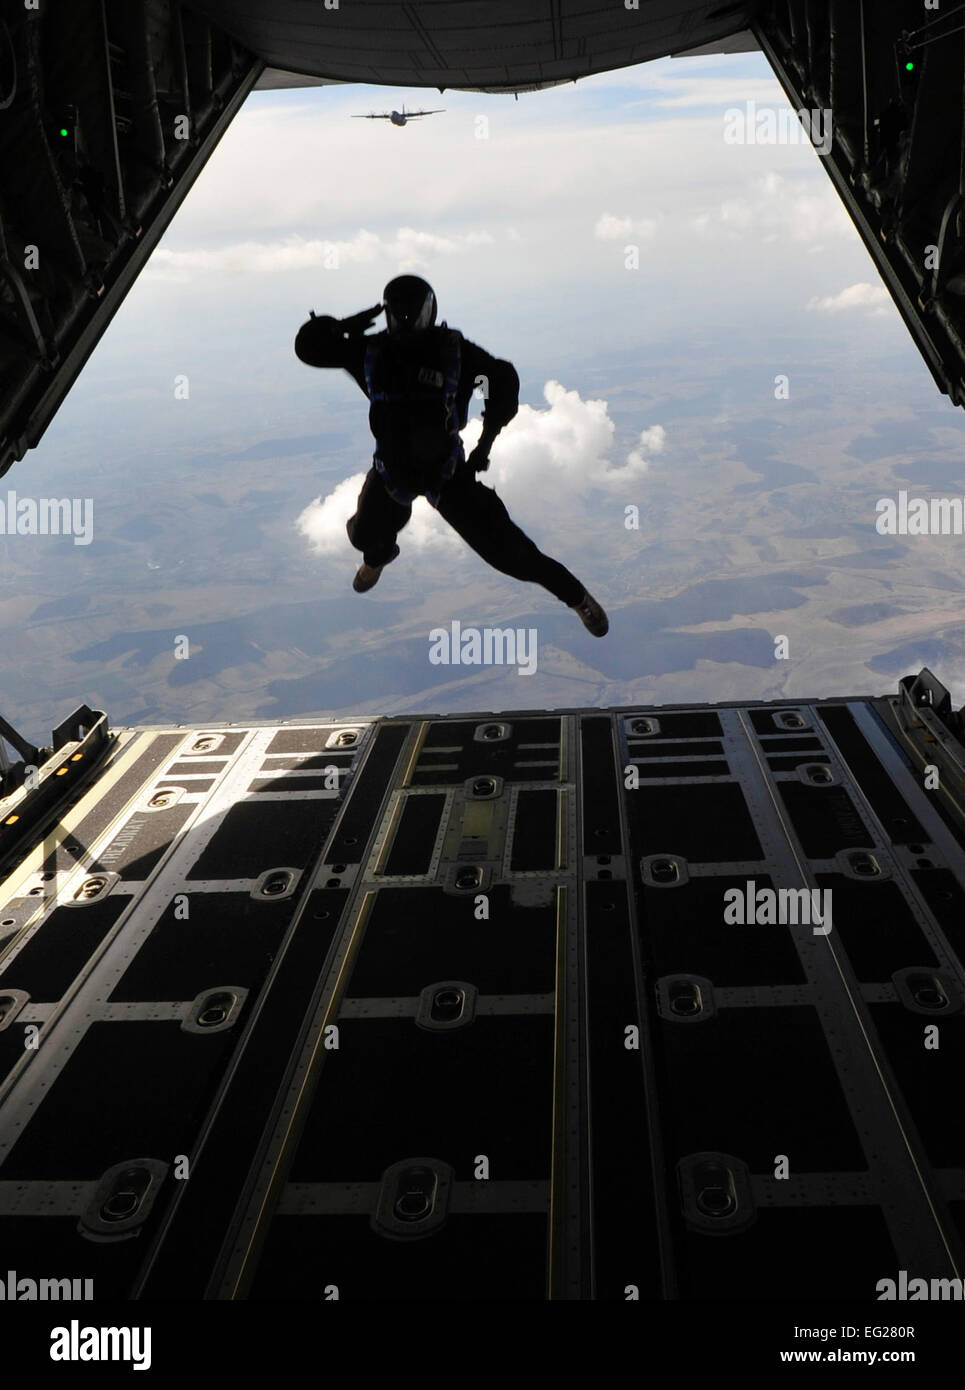 Master Sgt. Robert Zackery salutes as he exits a C-130J Super Hercules during a combined high-altitude, low-open, jump March 18, 2011, over a landing zone near Campia Turzii, Romania. This jump was conducted as part of Carpathian Spring 2011, an exercise where members of the U.S. military joined their Romanian counterparts to learn from one another and strengthen alliances. Sergeant Zackery is a jumpmaster assigned to the 4th Air Support Operations Group.  Tech. Sgt. Jocelyn L. Rich Stock Photo